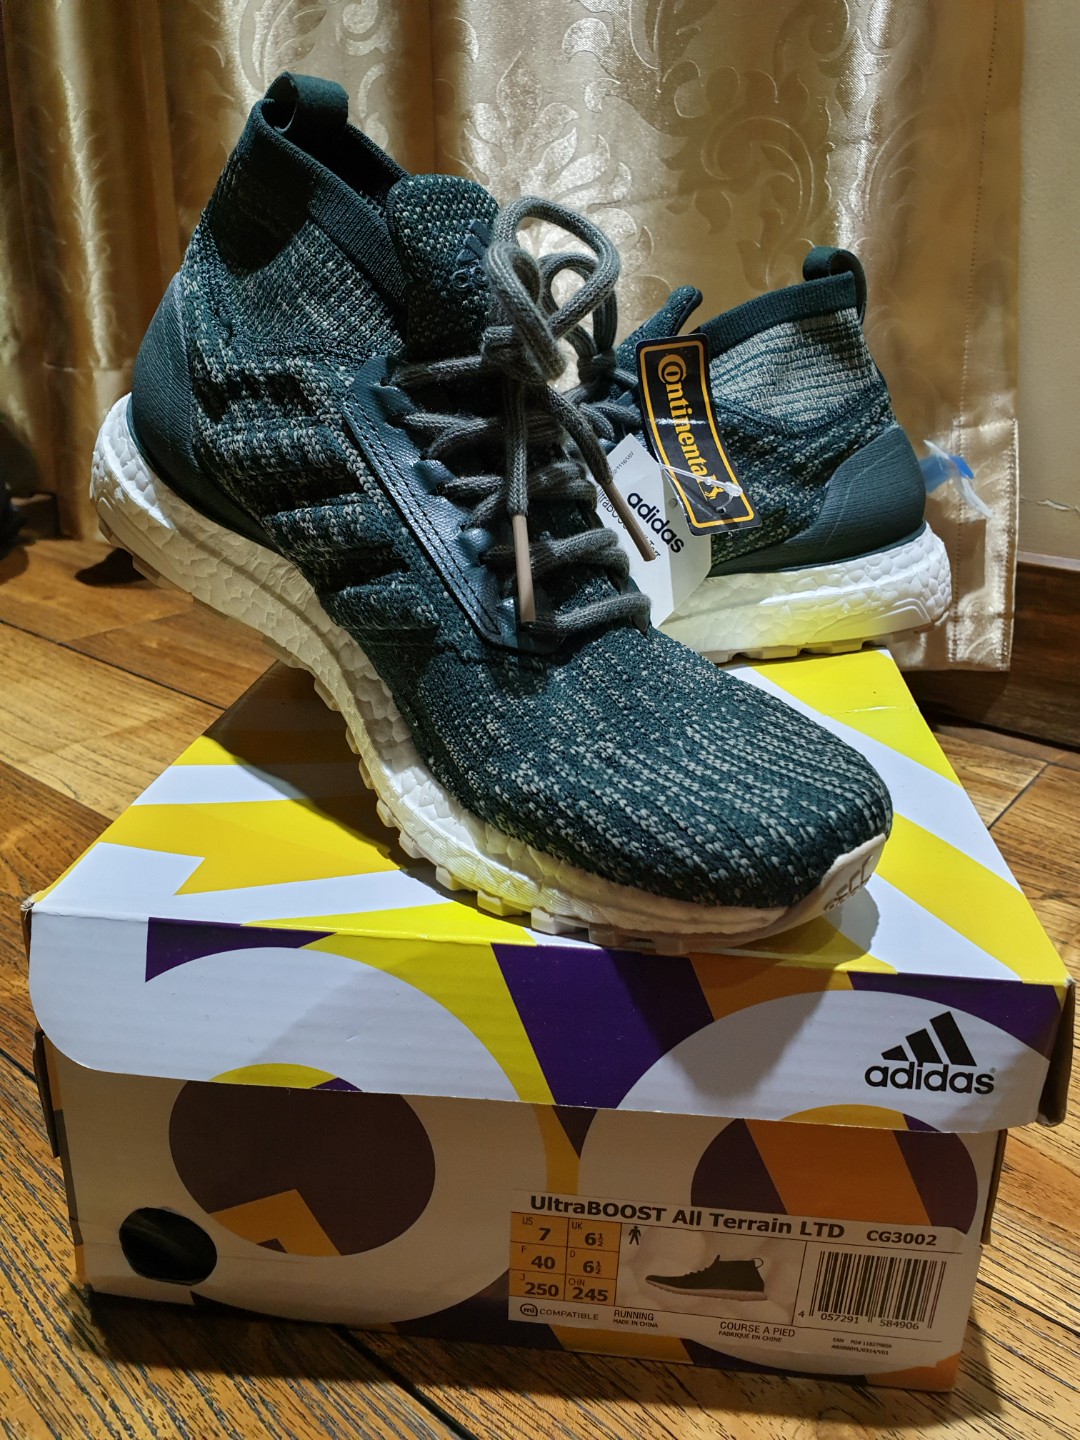 Adidas outlet black friday sale Adidas Ultra Boost Shoes Sale